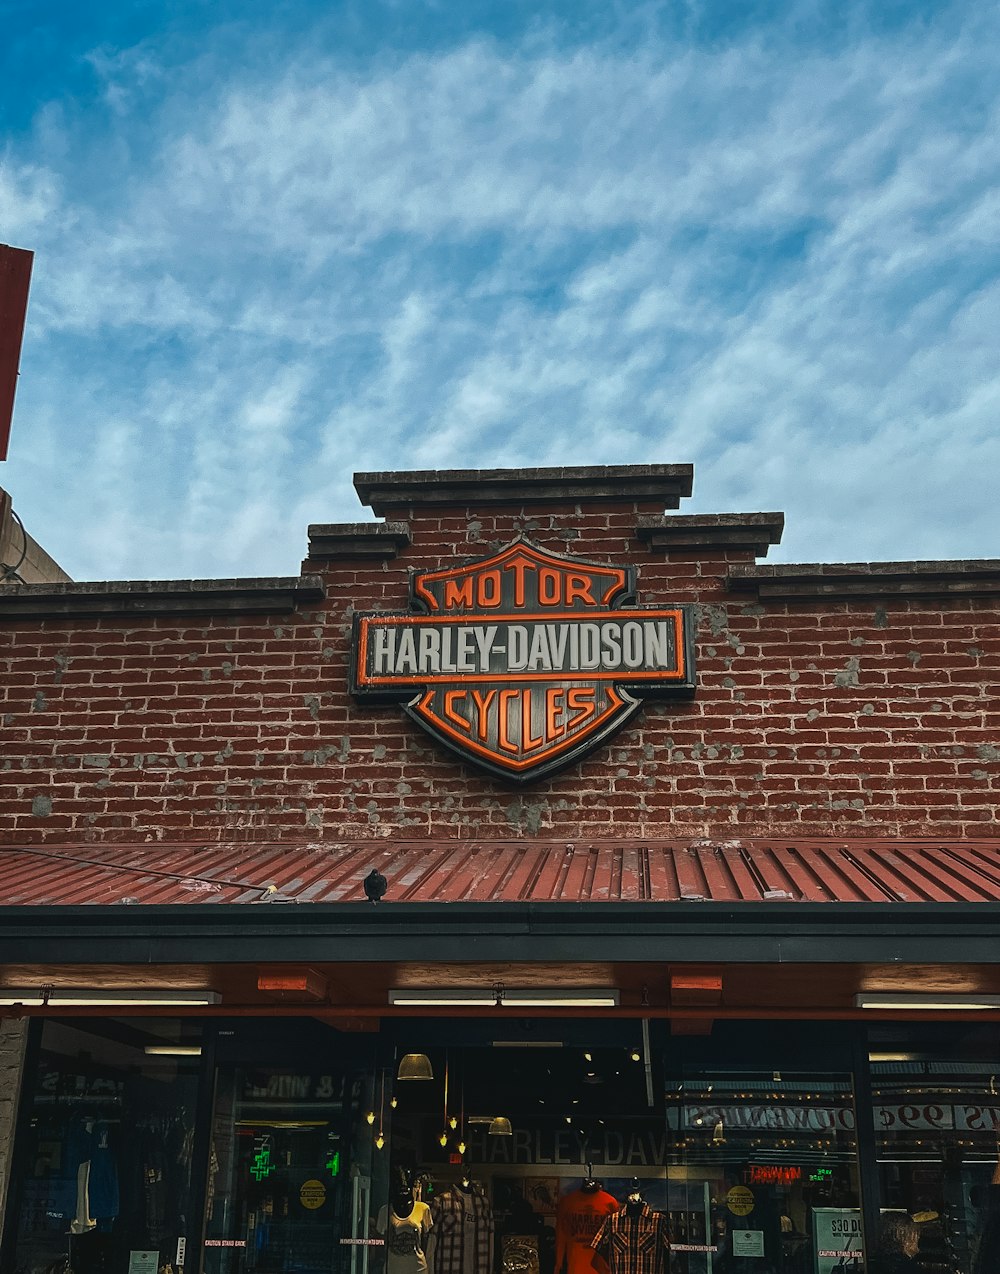 a brick building with a sign that says harley davidson cycles